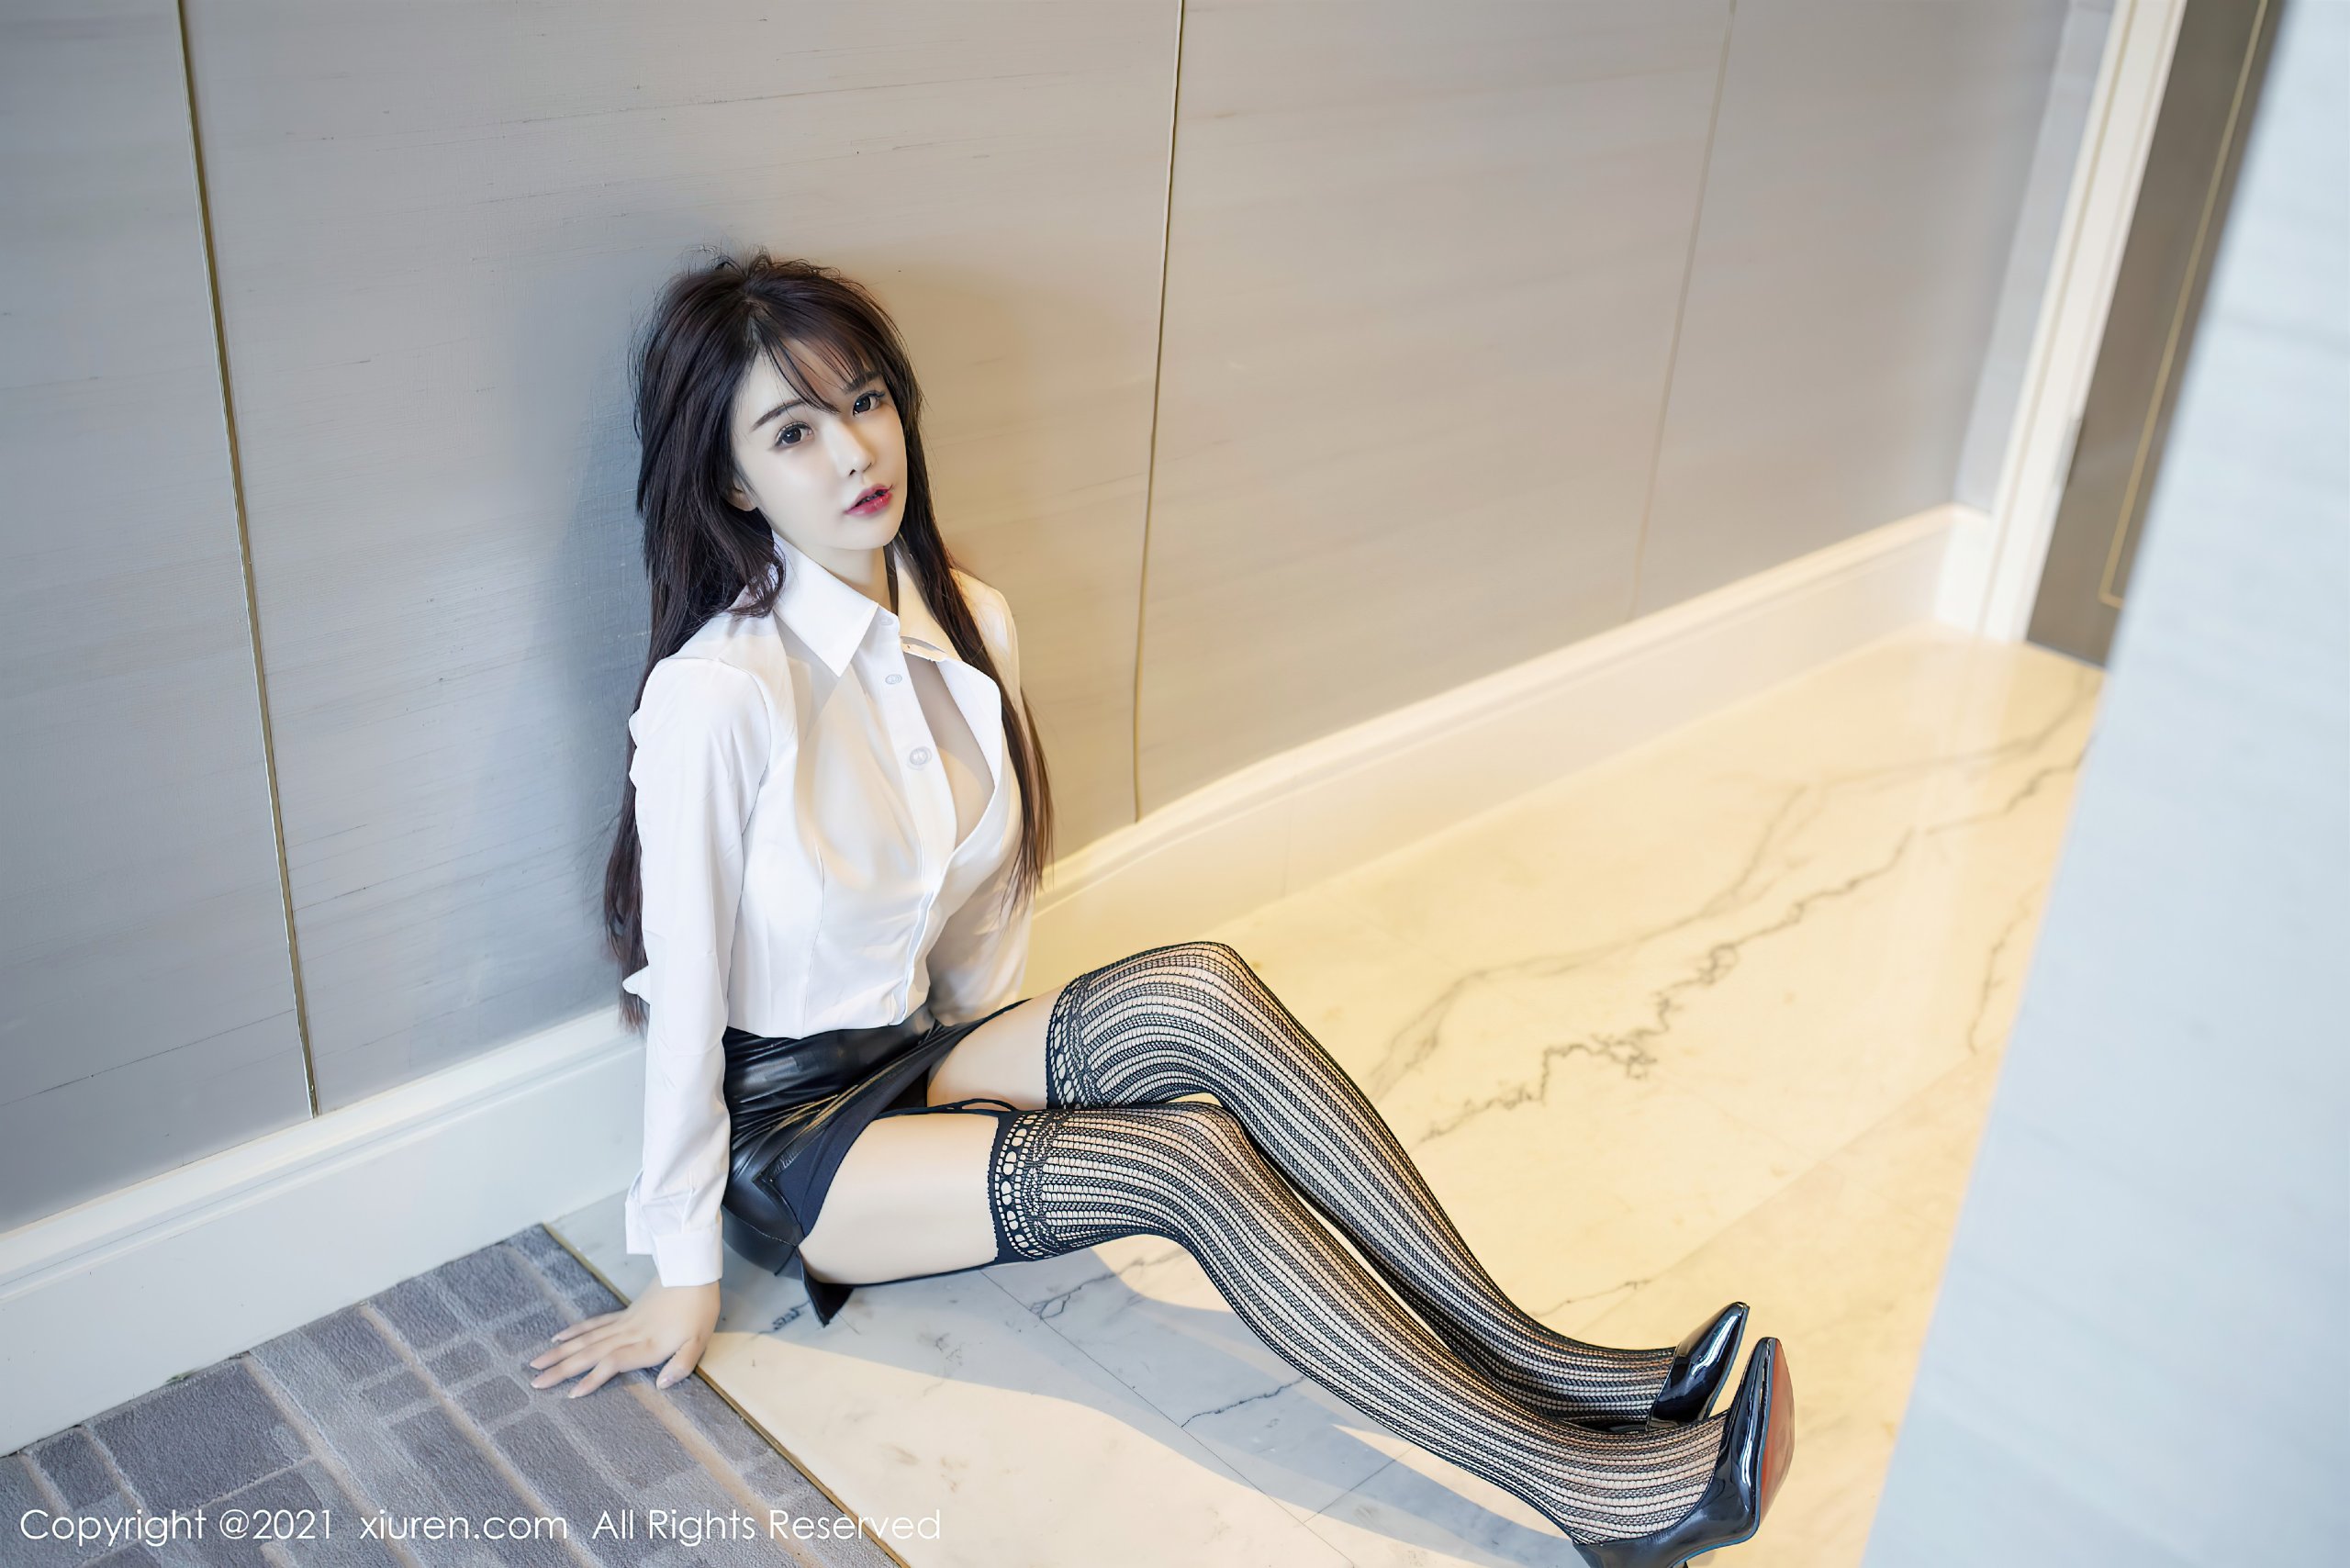 Chinese Model Asian High Heels White Blouse 2560x1708